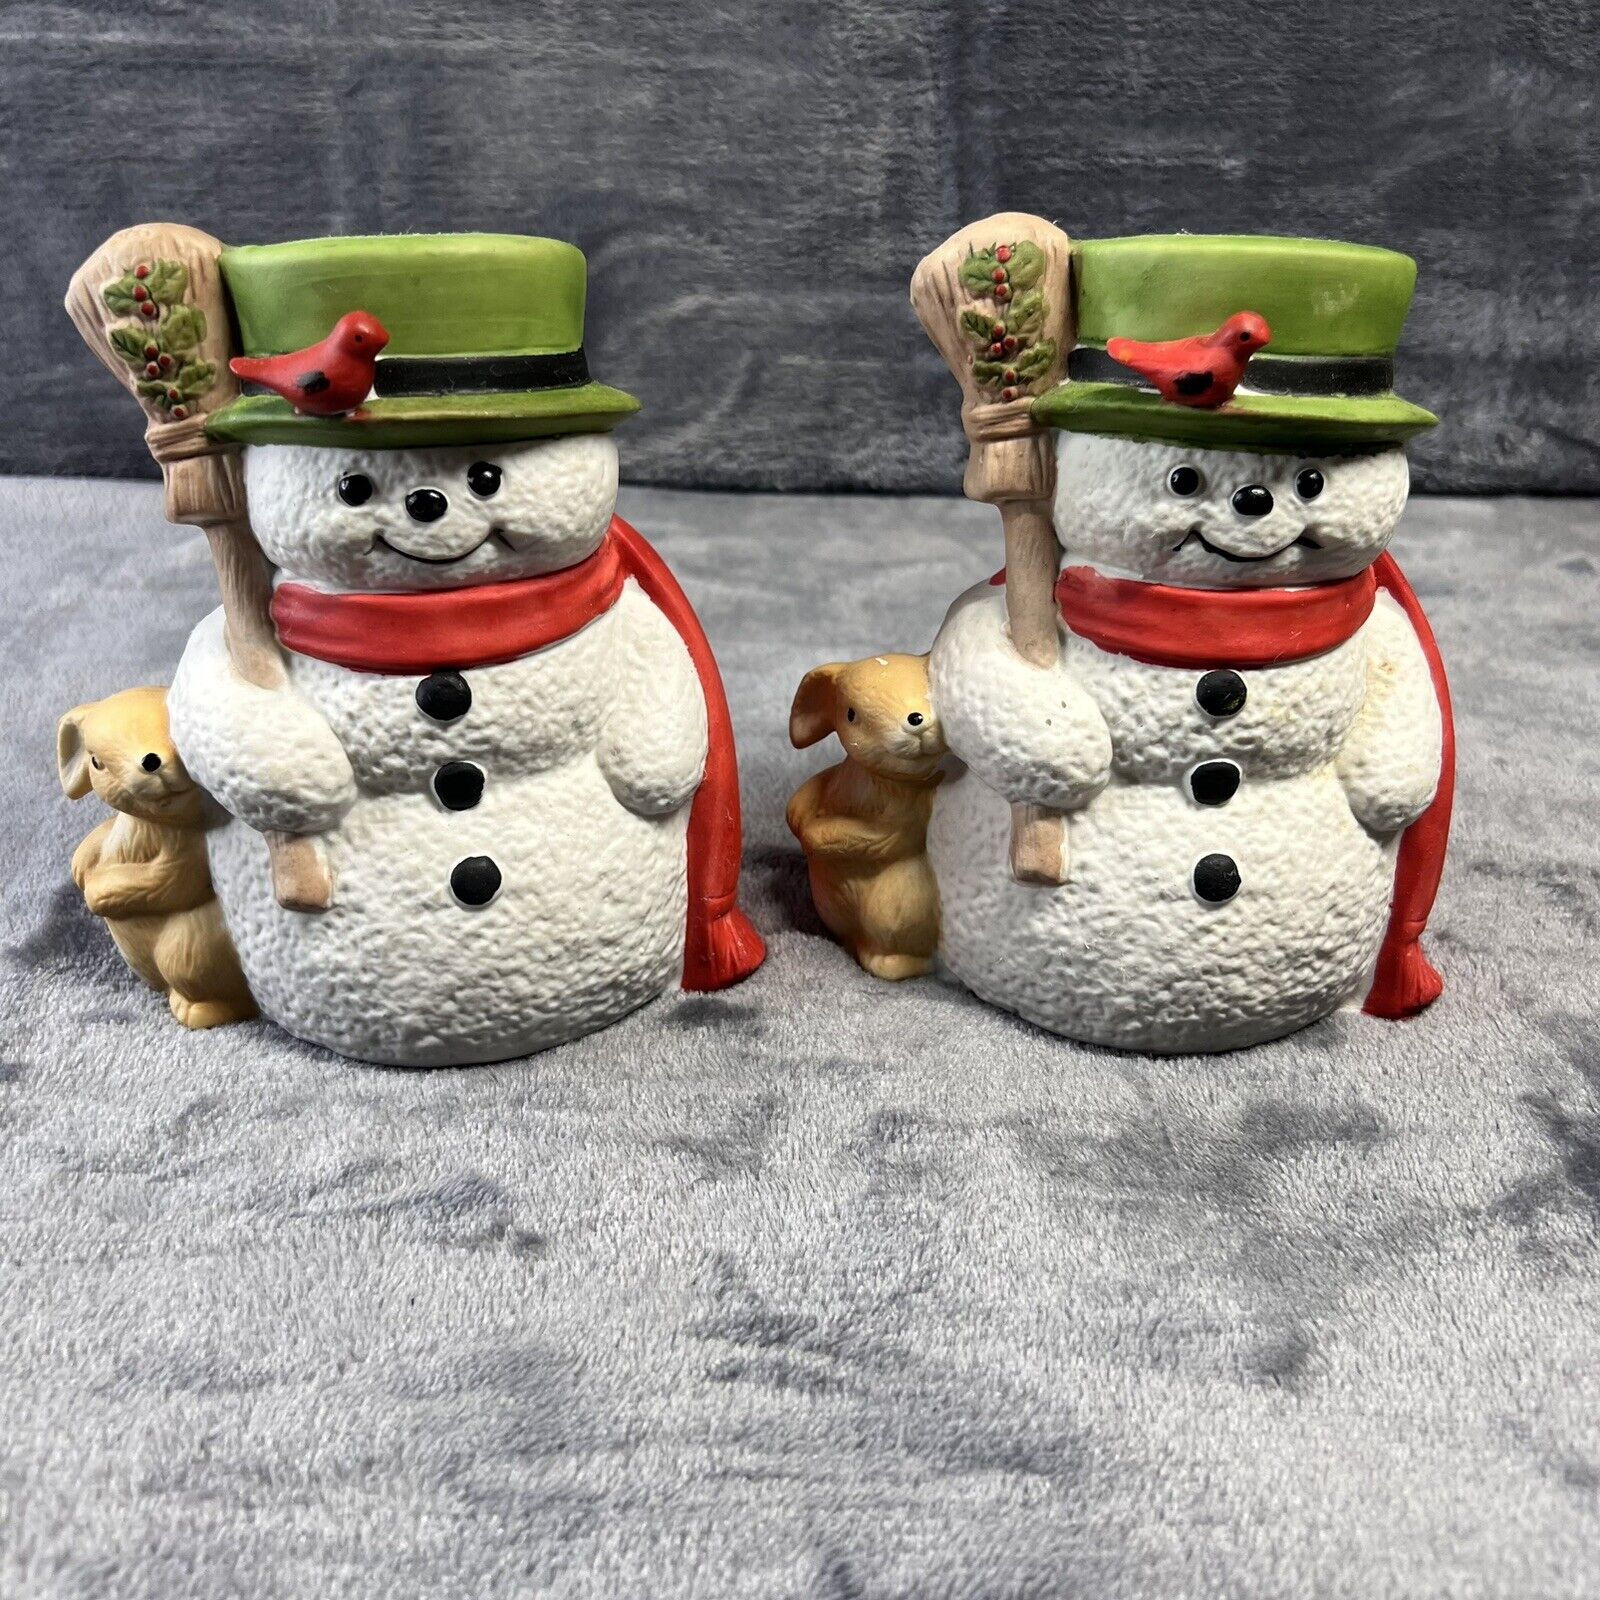 Vintage Jamestown Snowman with Bunny Christmas Figurines (2) No Music Boxes